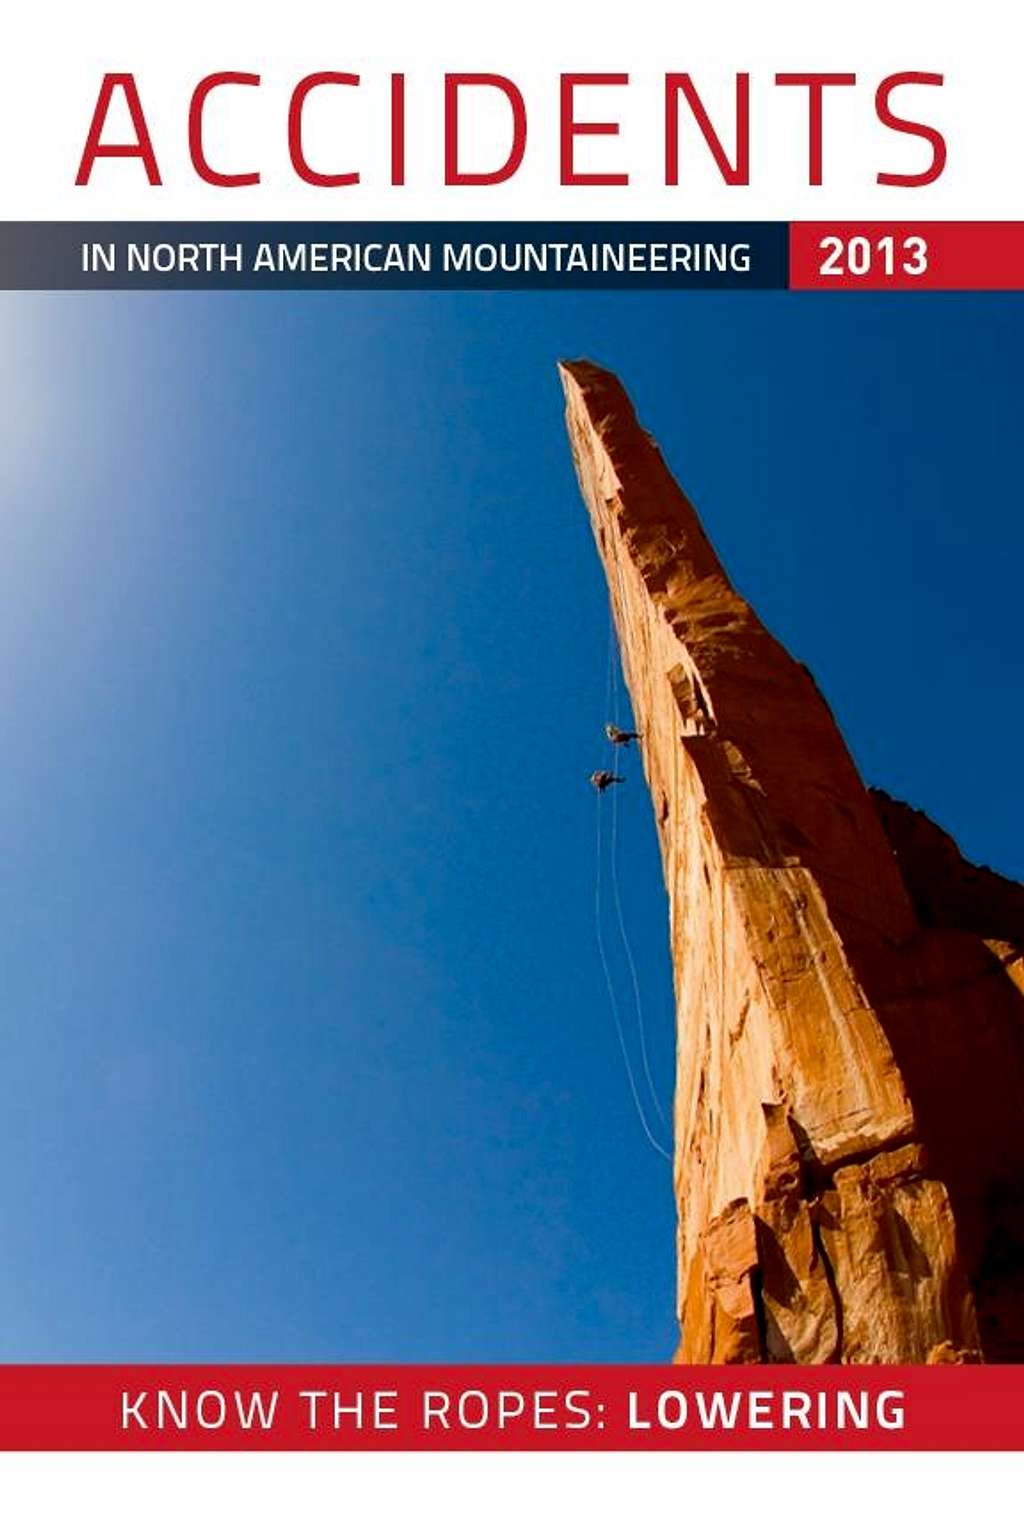 Accidents in North American Mountaineering 2013